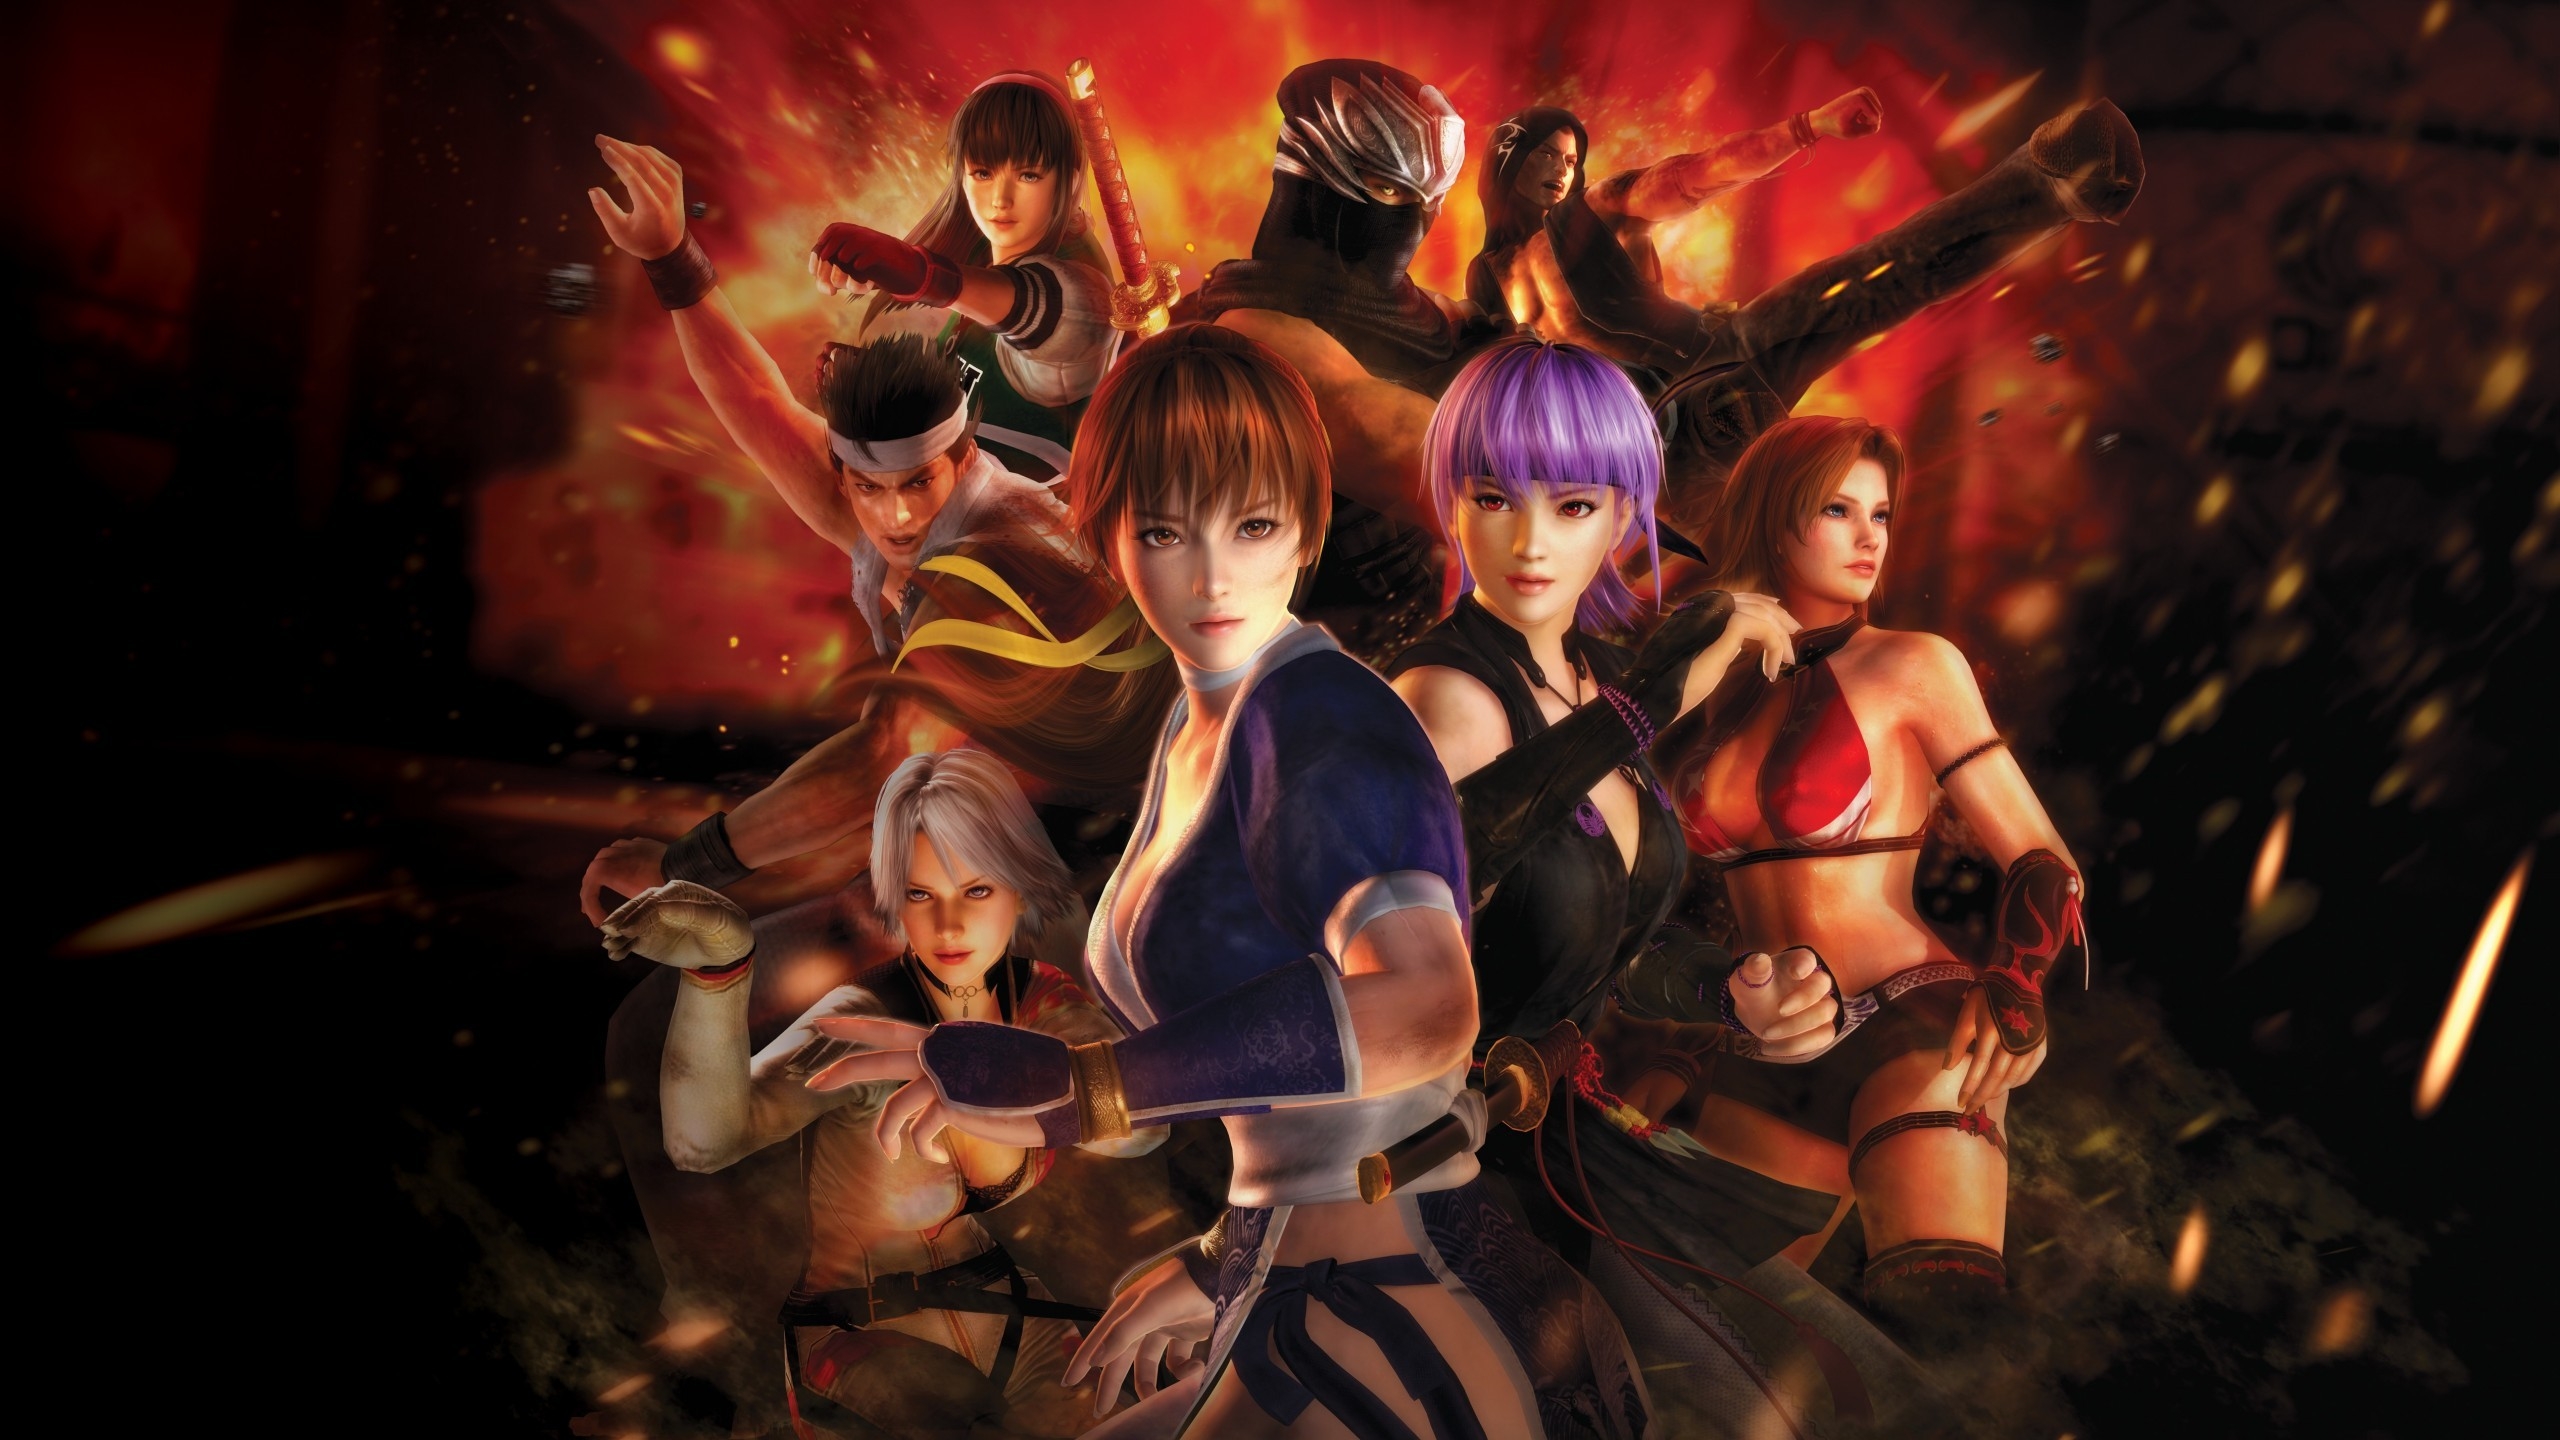 Dead or Alive 5 Poster for 2560x1440 HDTV resolution